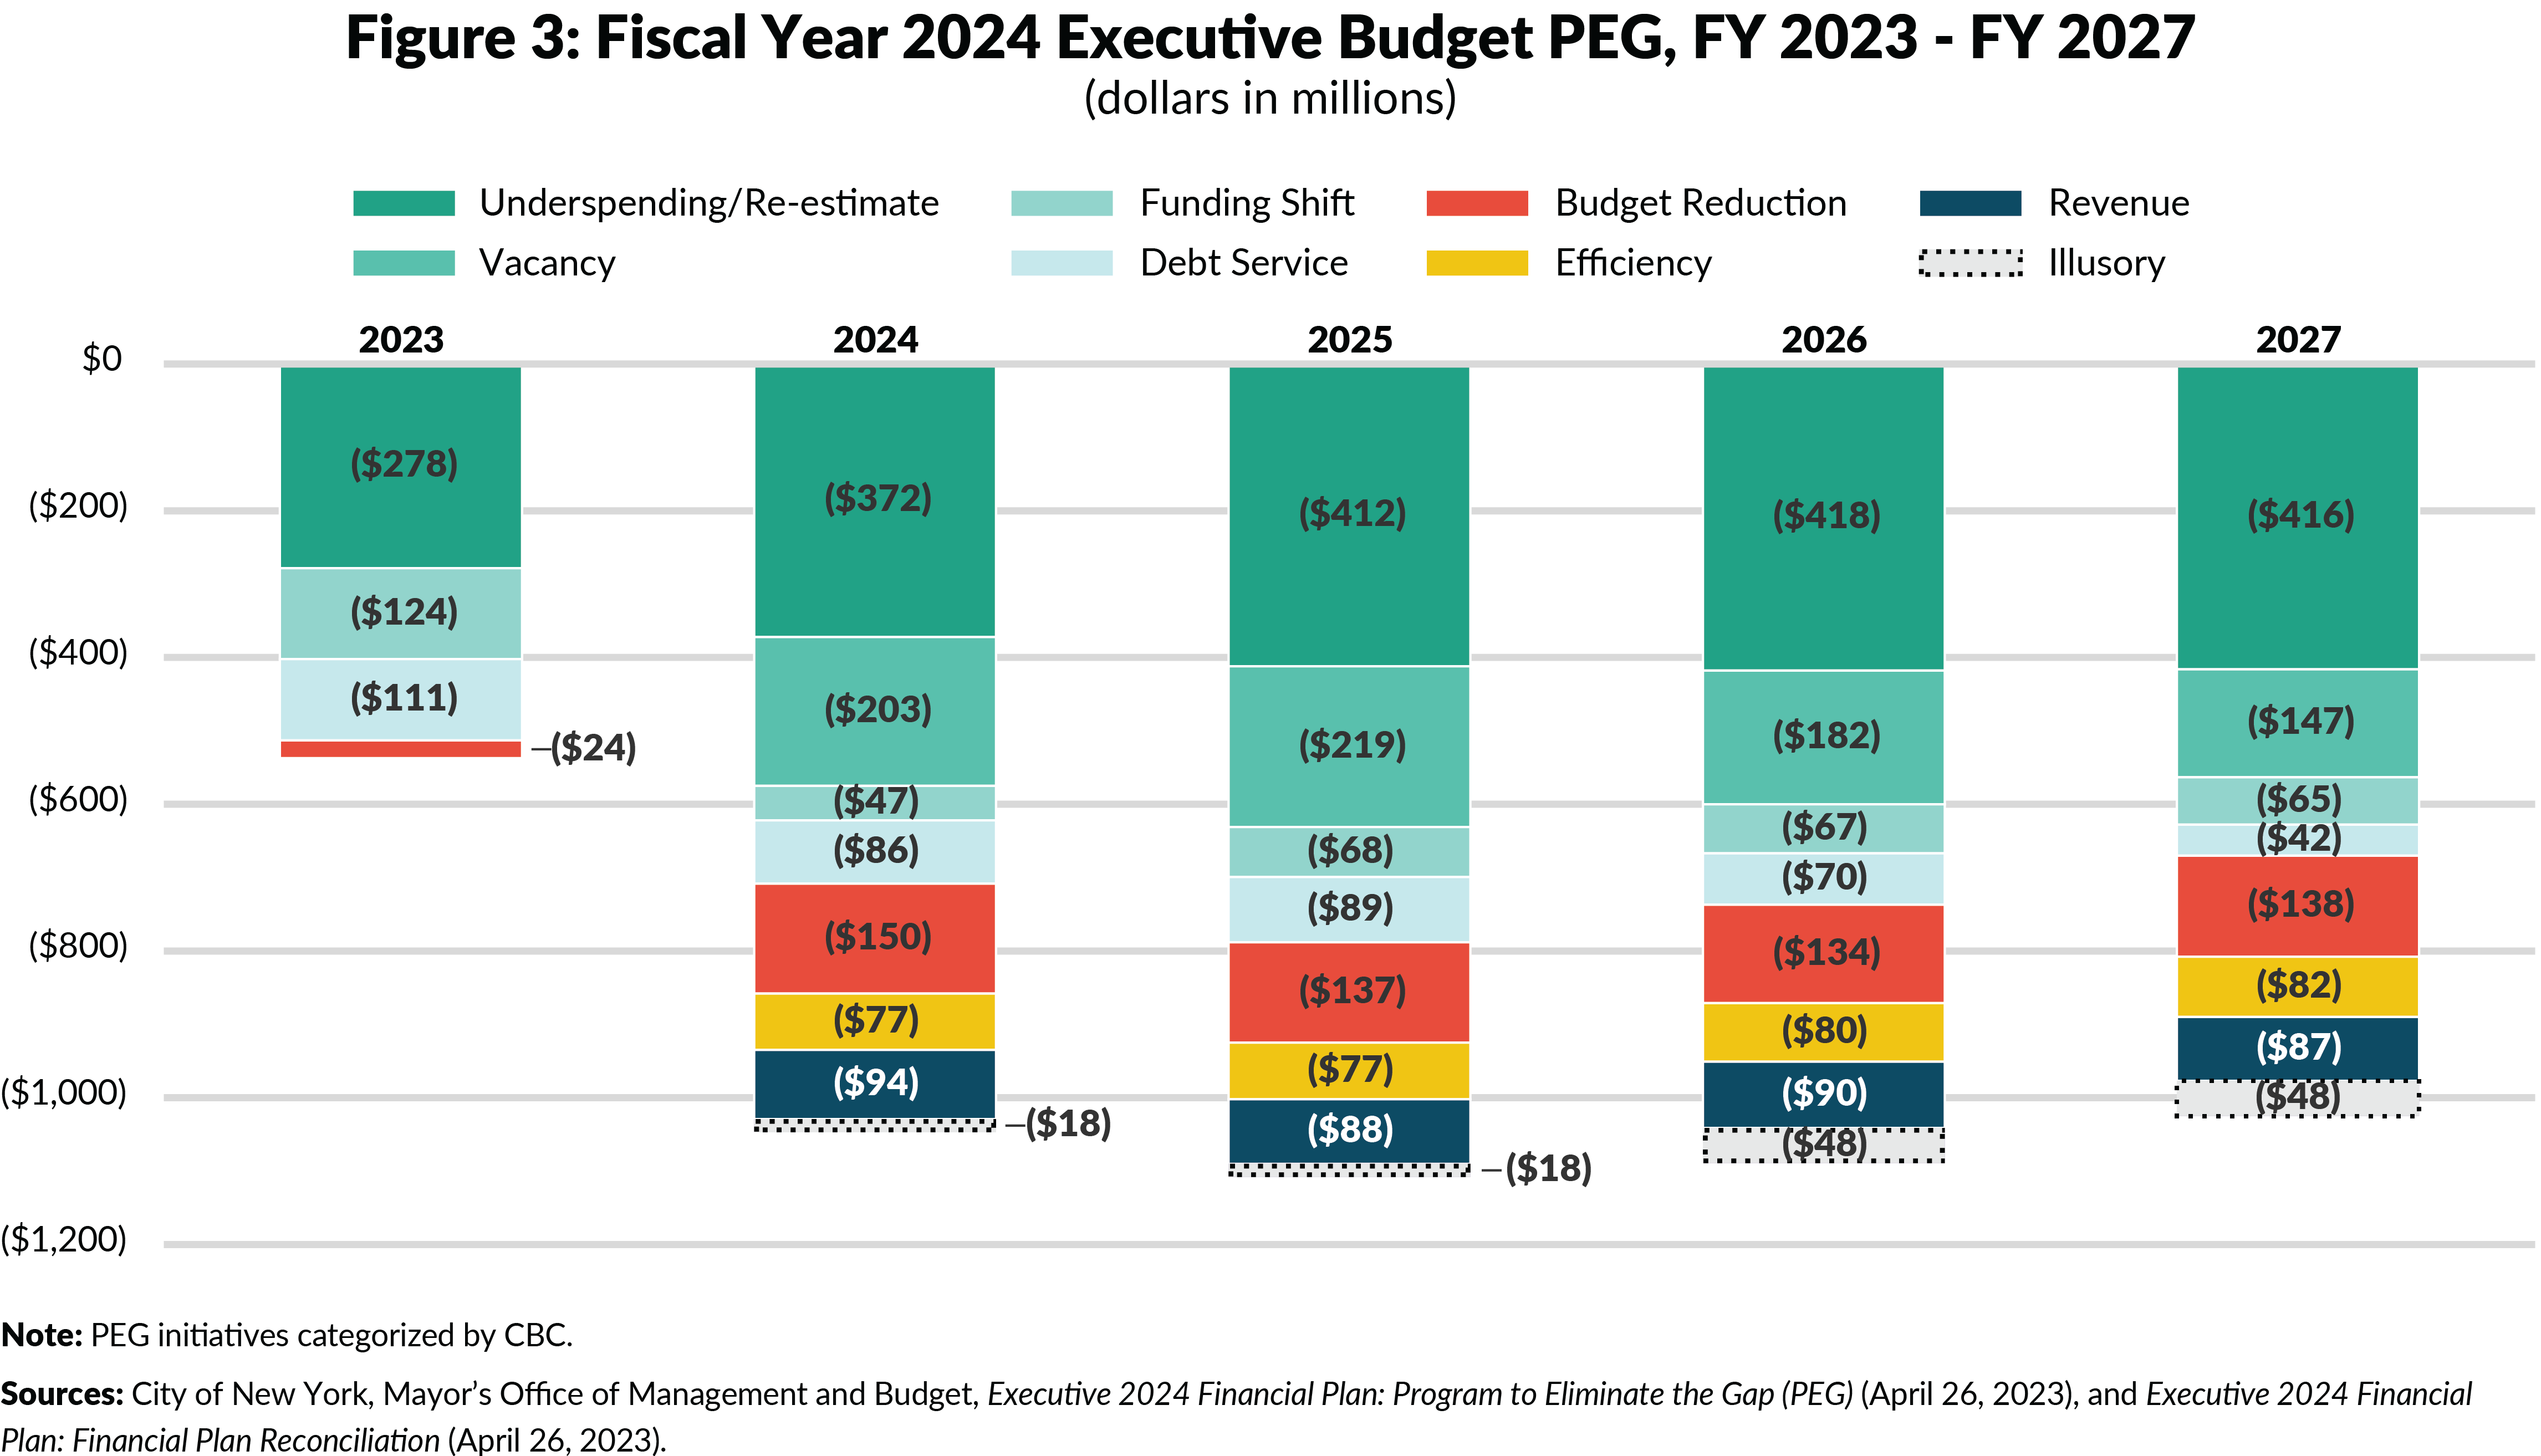 Figure 3: NYC Fiscal Year 2024 Executive Budget PEG Savings by CBC Category,FY 2023 - FY 2027 (dollars in millions)